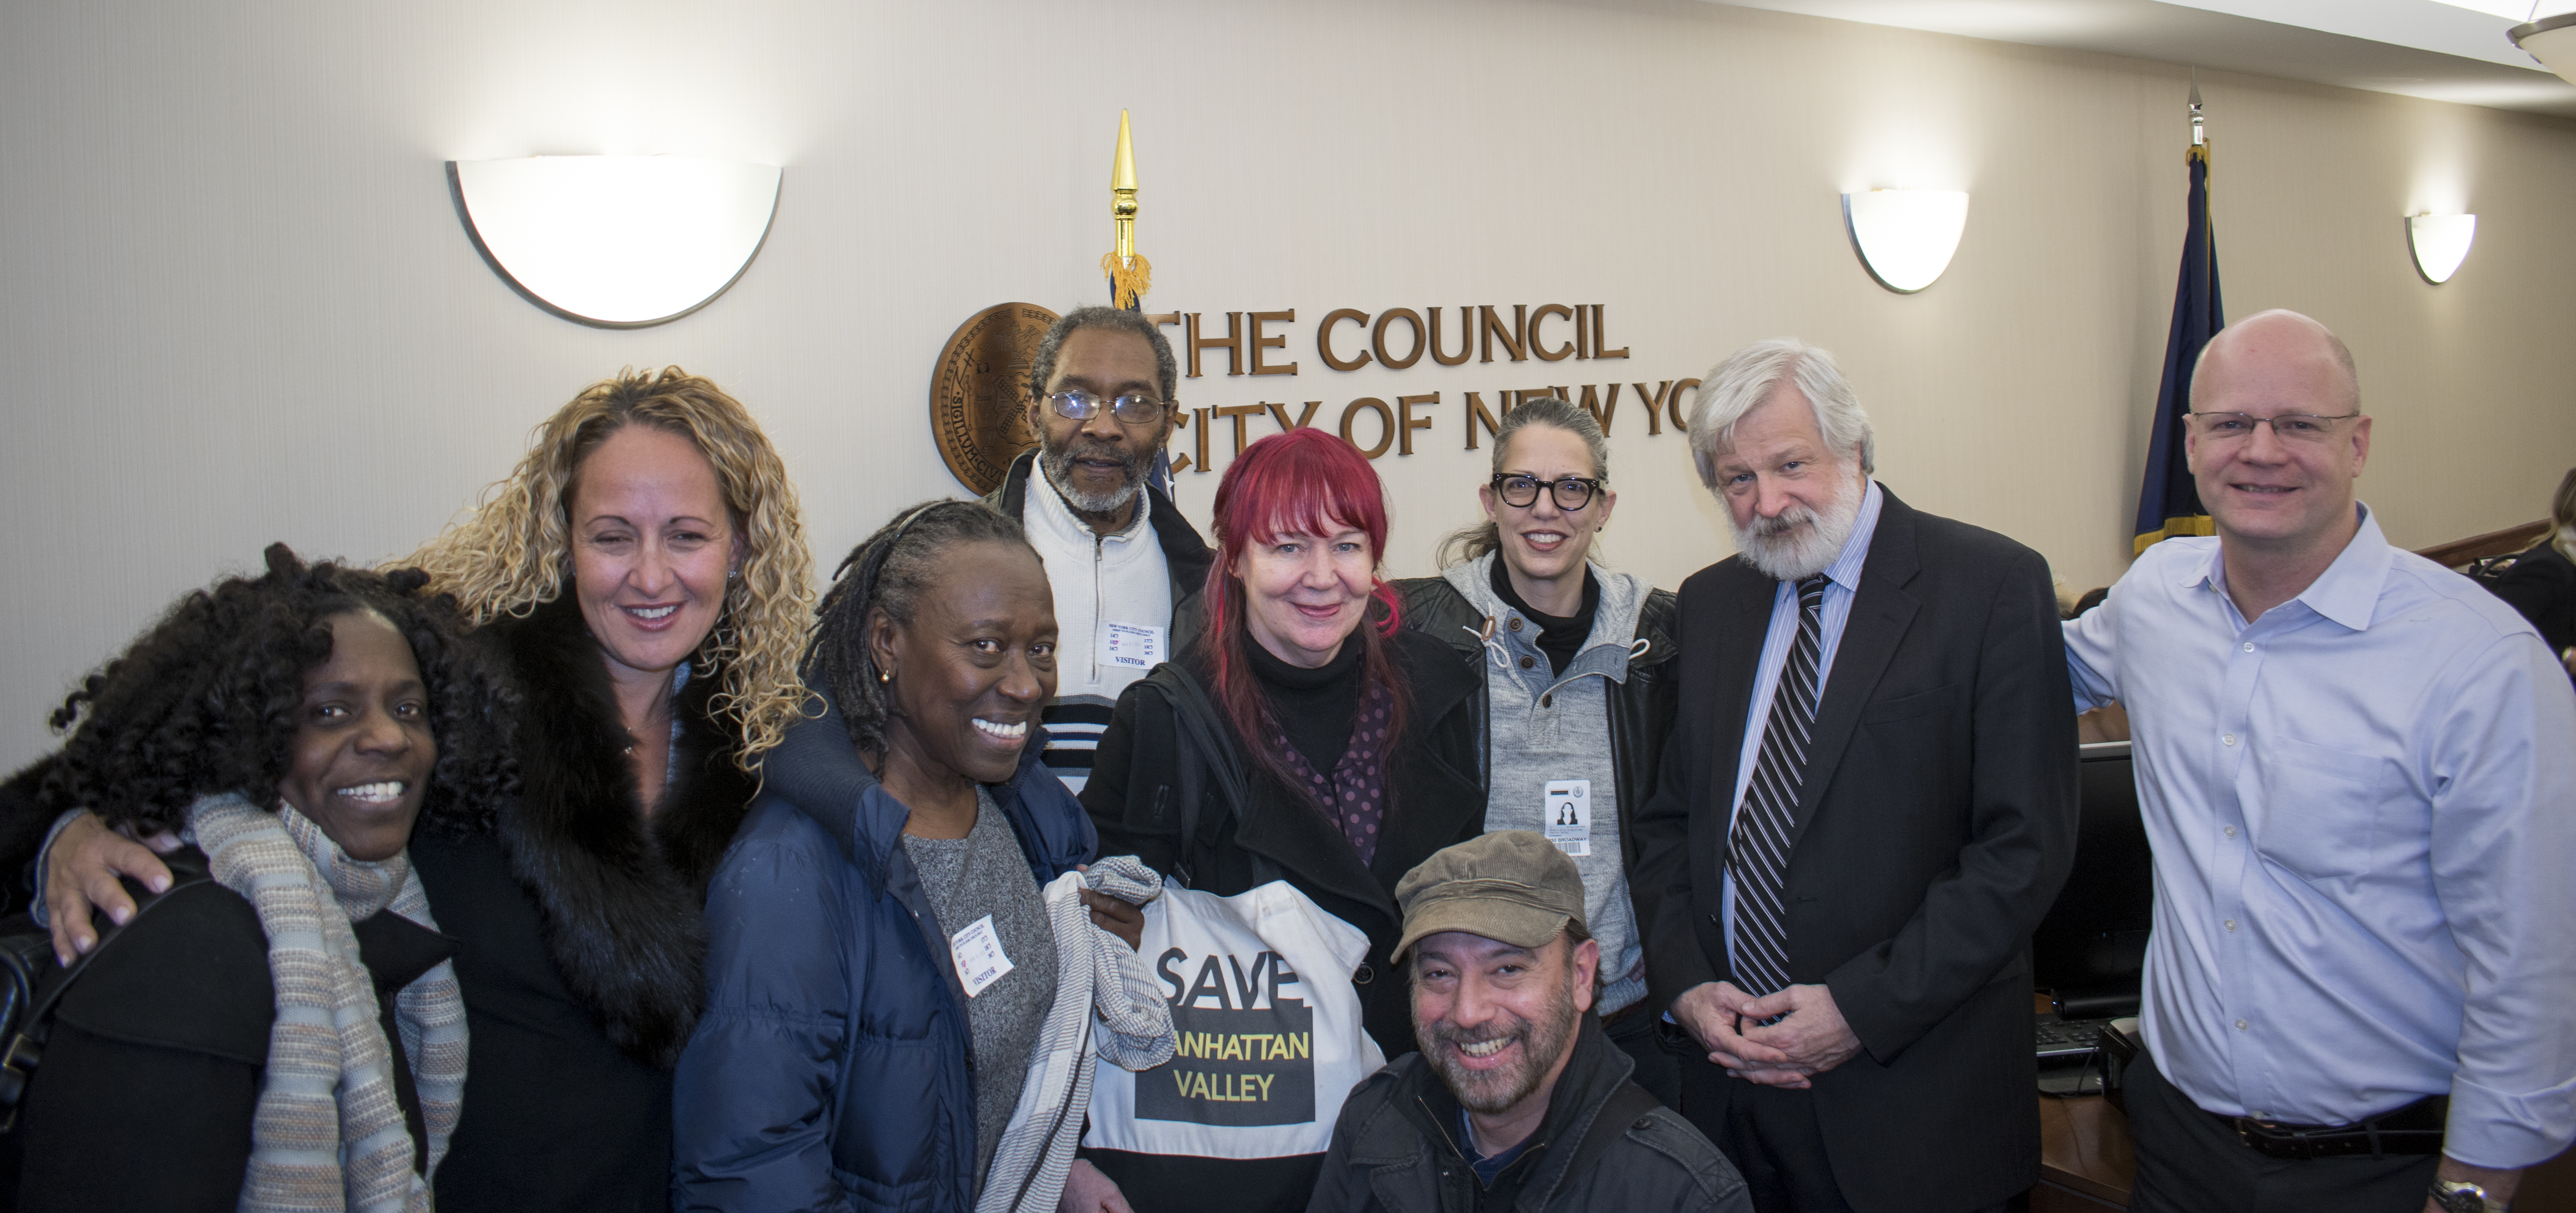 HDFC Coalition and our attorneys met with City Council Staff on Nov. 21, 2016. Left to right: Attorney Sheila E. Small, Attorney Emma Lupu, Sylvia Tyler, Wil Buckery, Glory Ann Hussey Kerstein, Michael Palma Mir, Tina DiFeliciantonio, Attorney Edward Filemyr, John McBride.